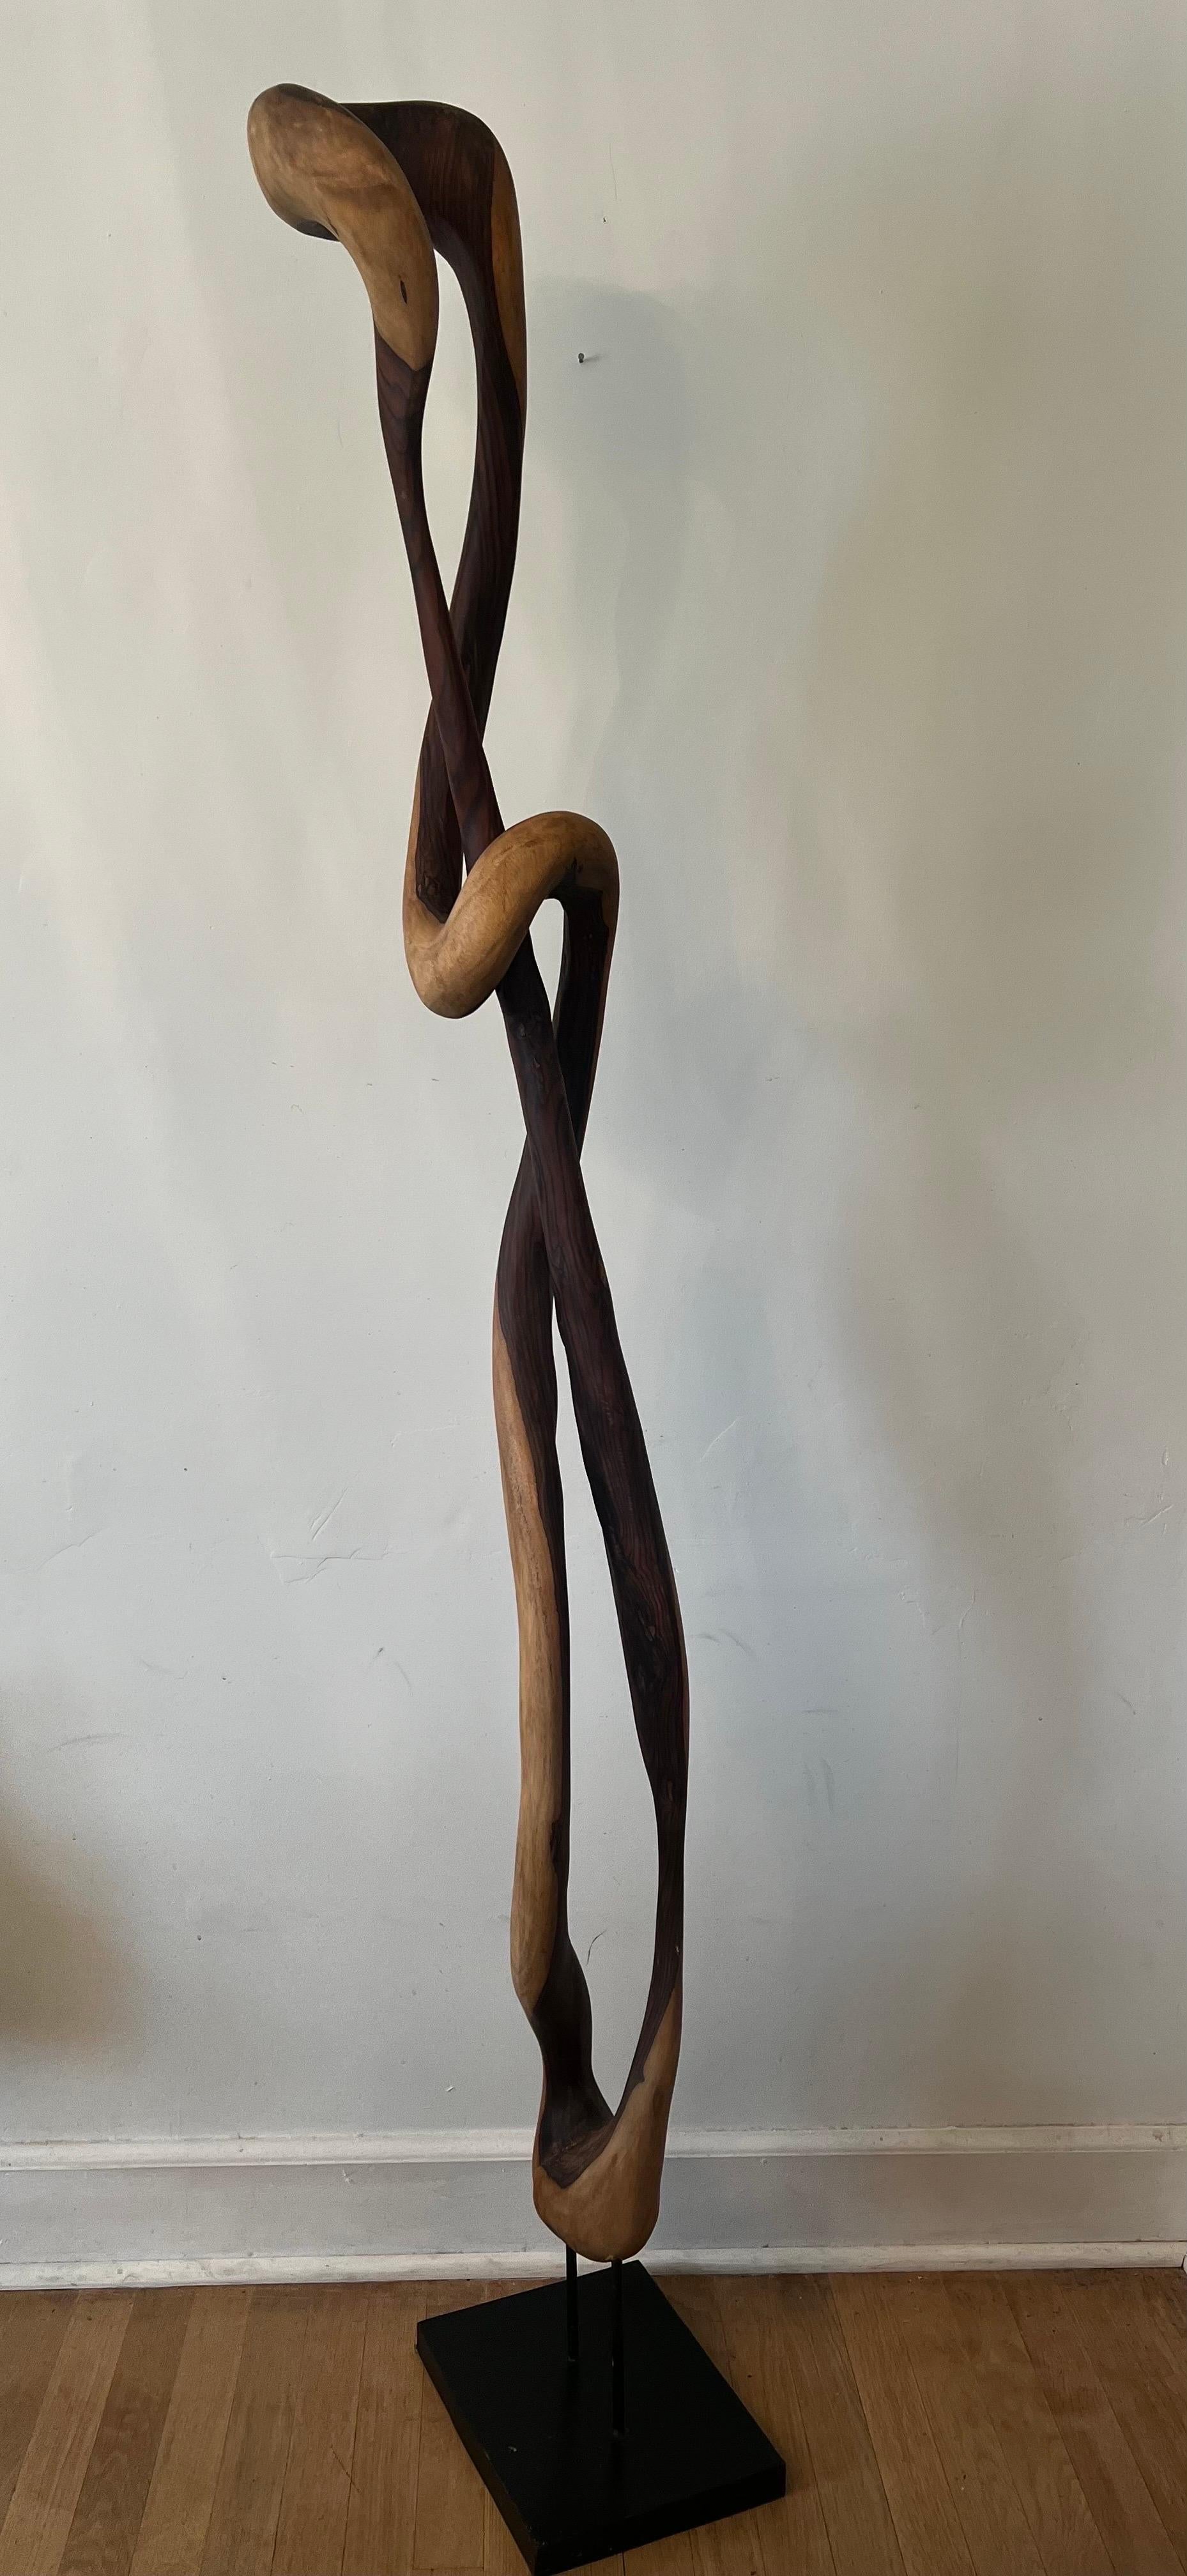 Hand-Carved Organic Adrianna Shamaris Style Sona Wood Sculpture on Stand For Sale